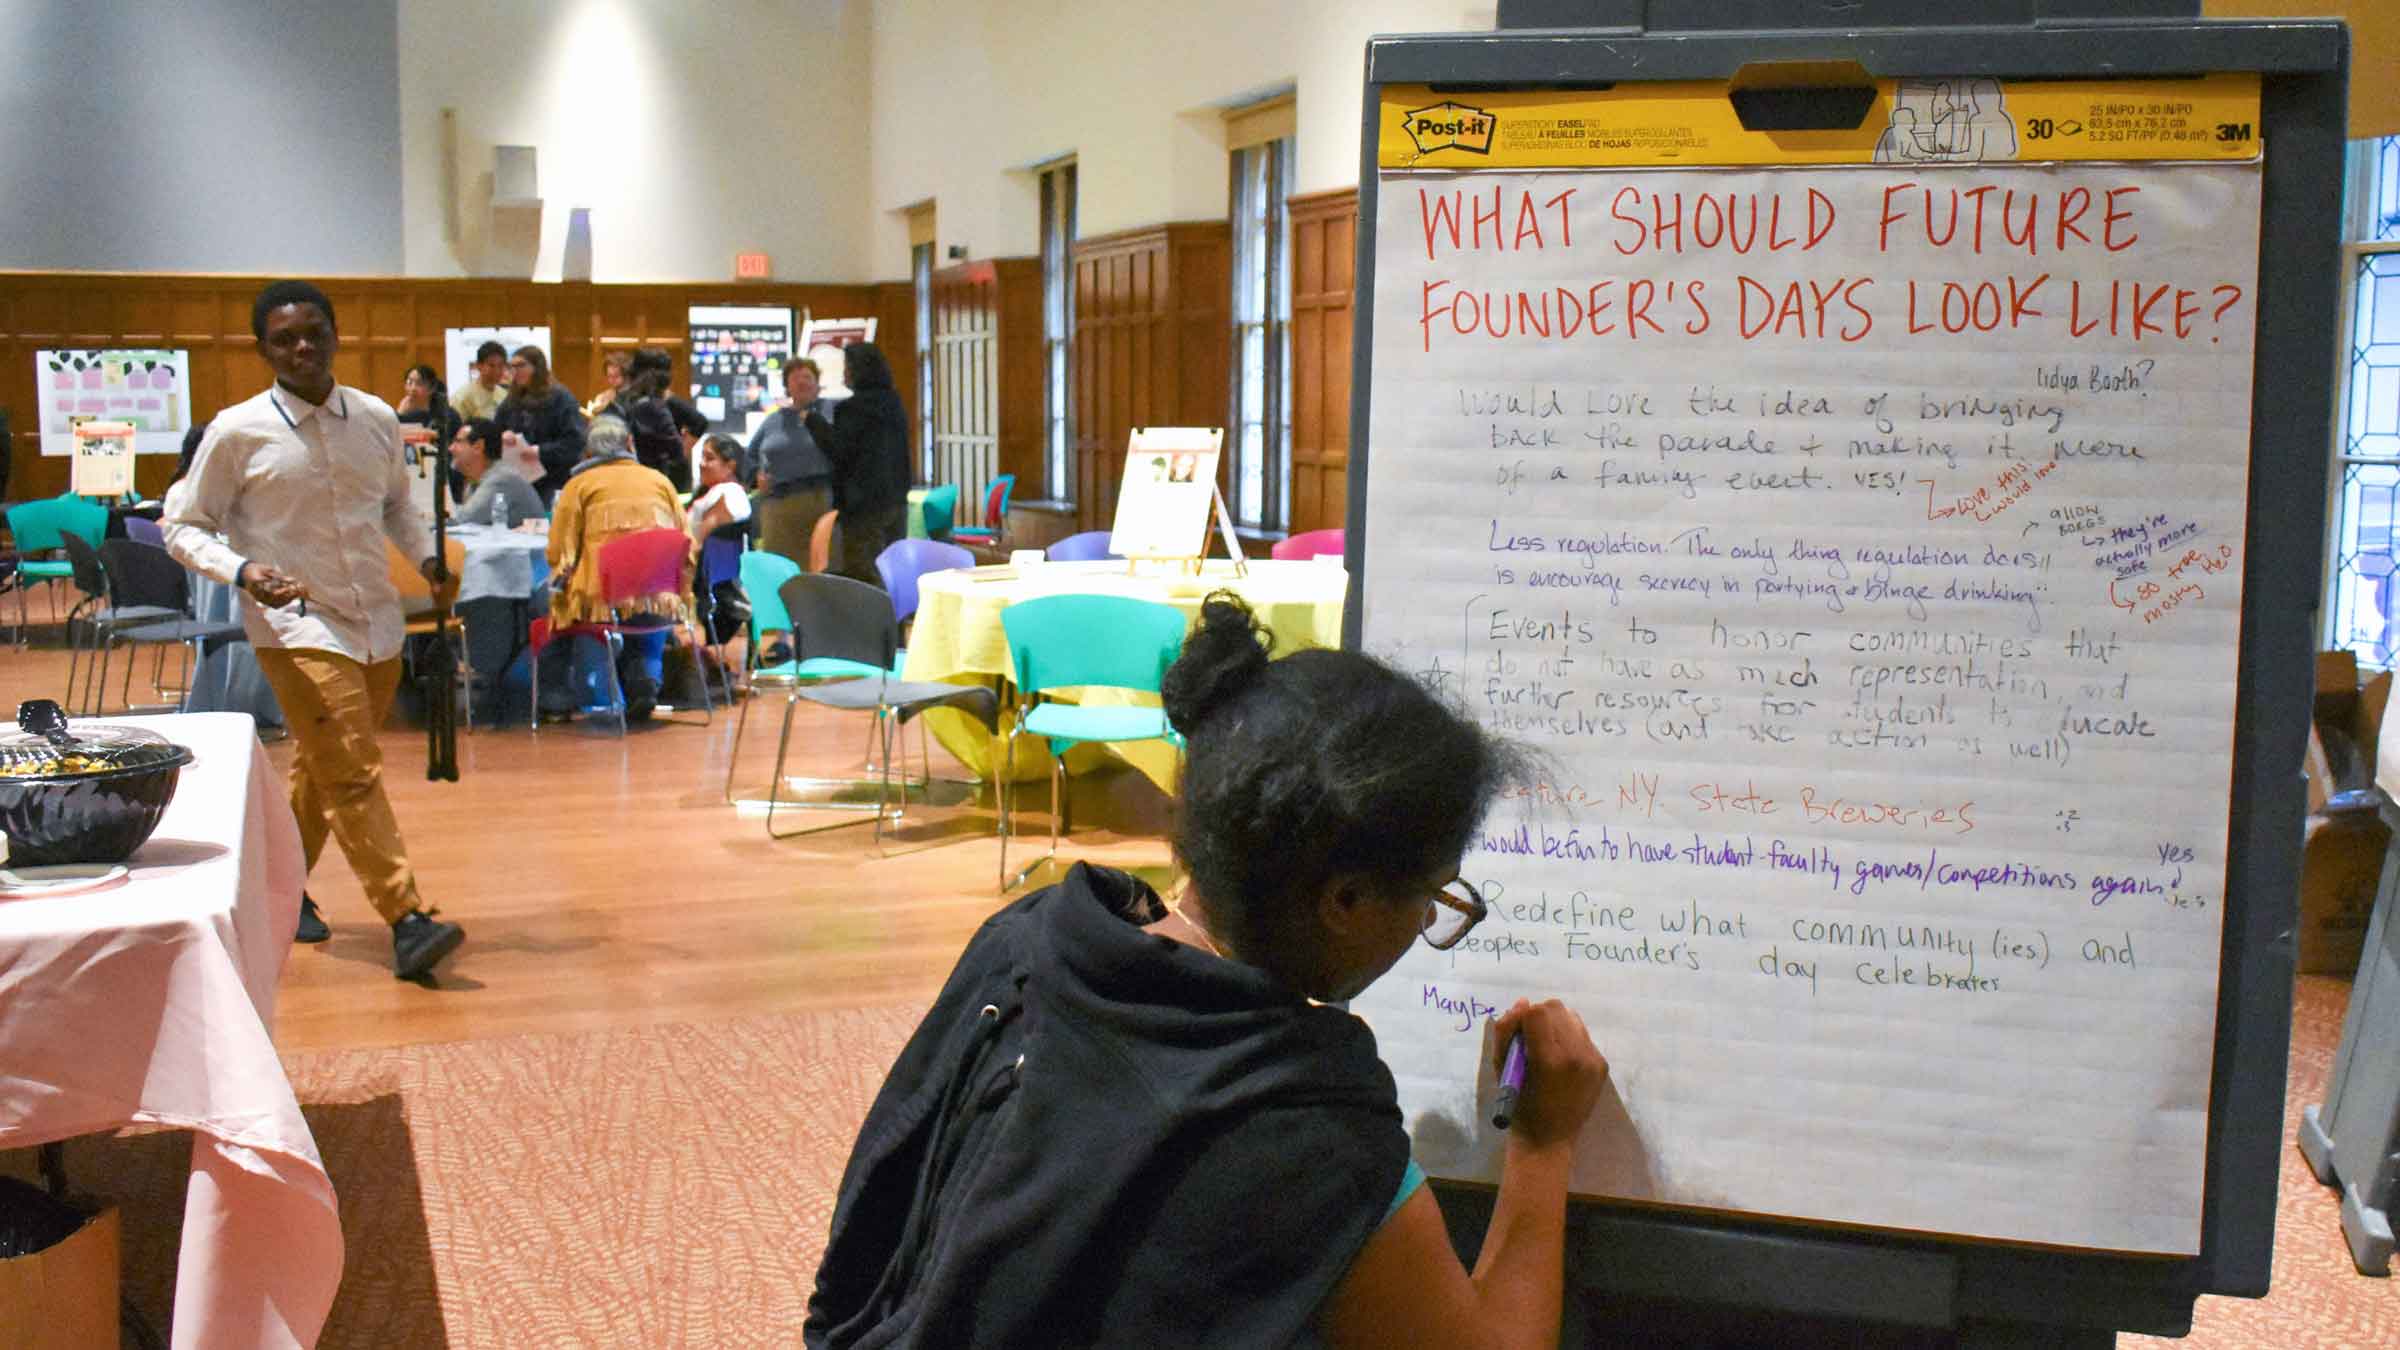 A very large room with wood-paneled walls and windows. An event is taking place here. In the foreground, a person with glasses and black hair in two buns is writing on a whiteboard, they’re back to the viewer. The whiteboard has a handwritten title at the top reading “What should future founder’s days look like?” Below it are written suggestions in different handwriting. In the background, a group of people sit at a table.